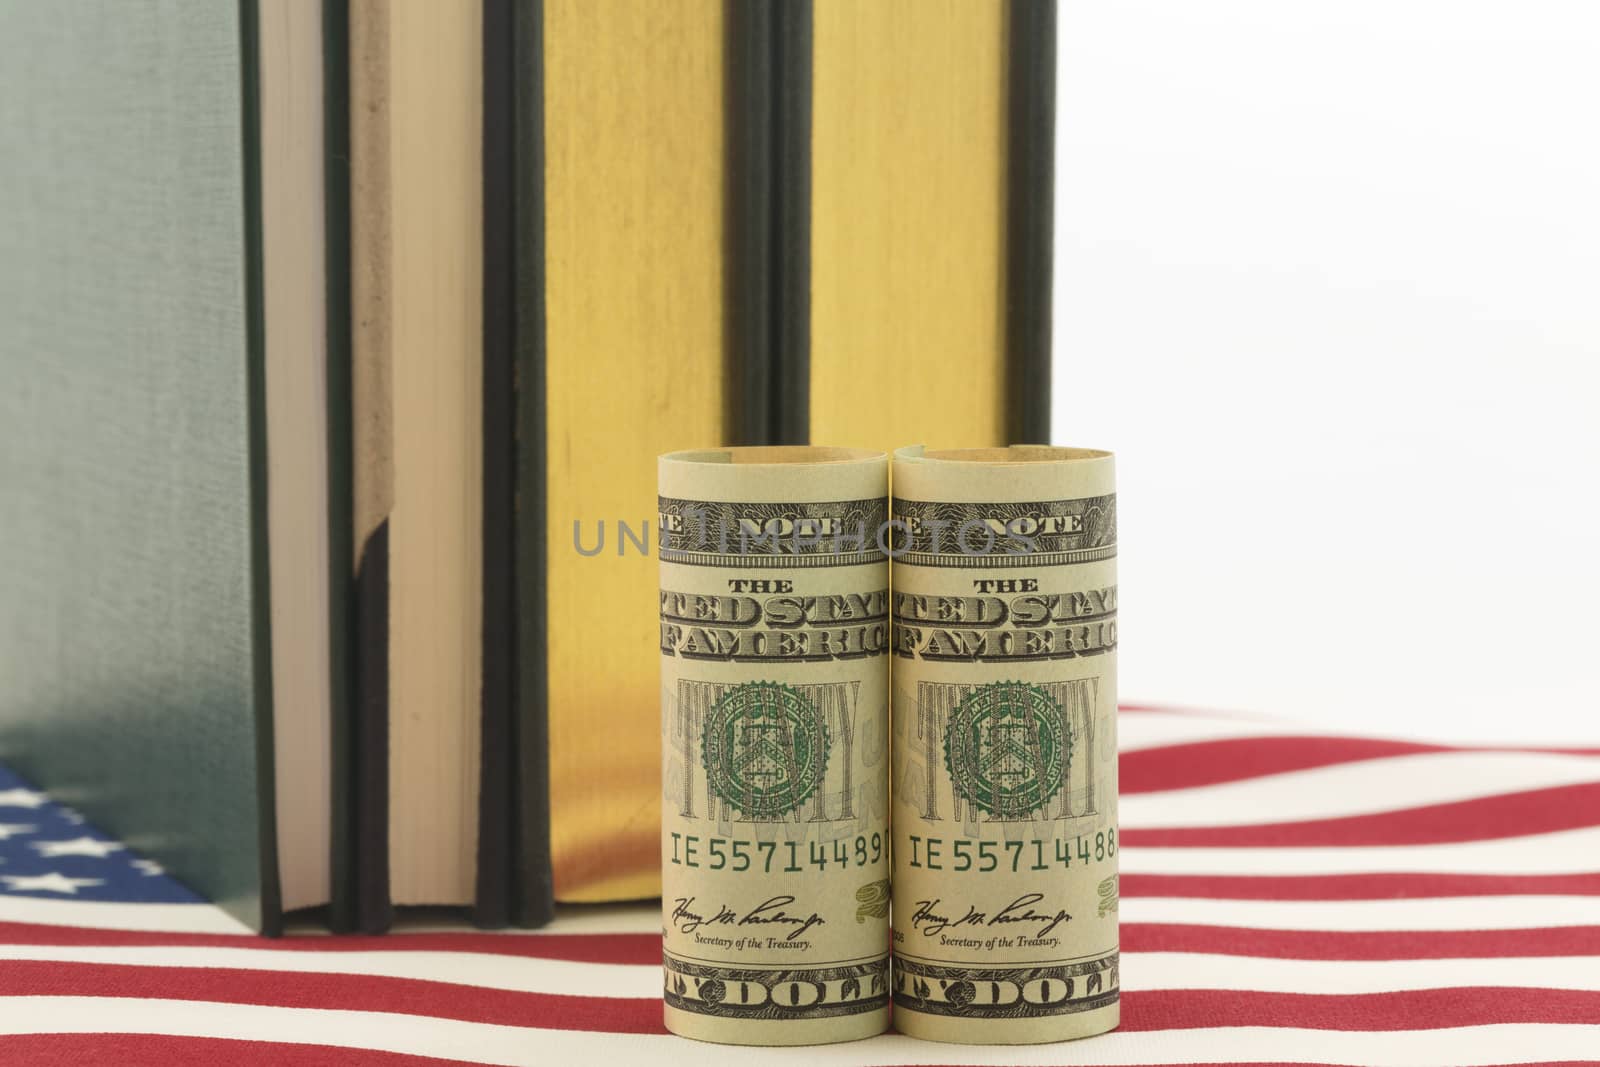 American Education Costs, Investments, and Policy by fmcginn